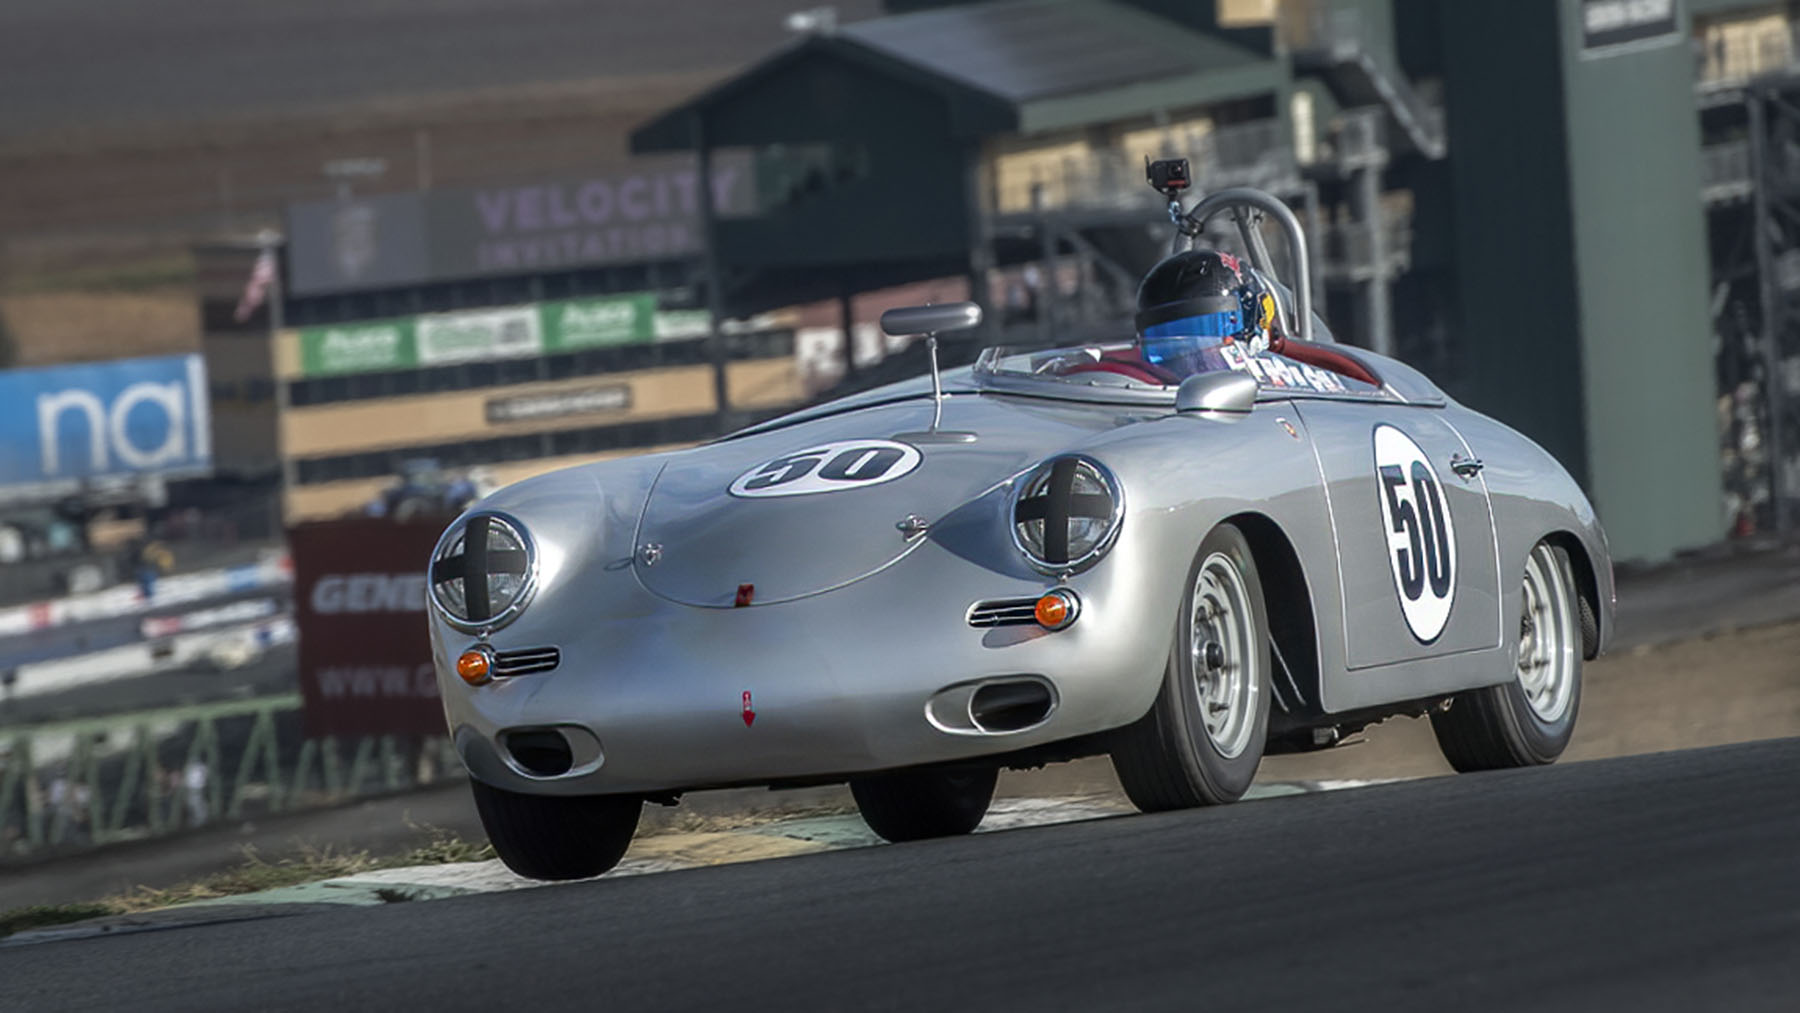 Tyler Hagan cruises out of Turn 2 in a 1960 Porsche 356 Roadster